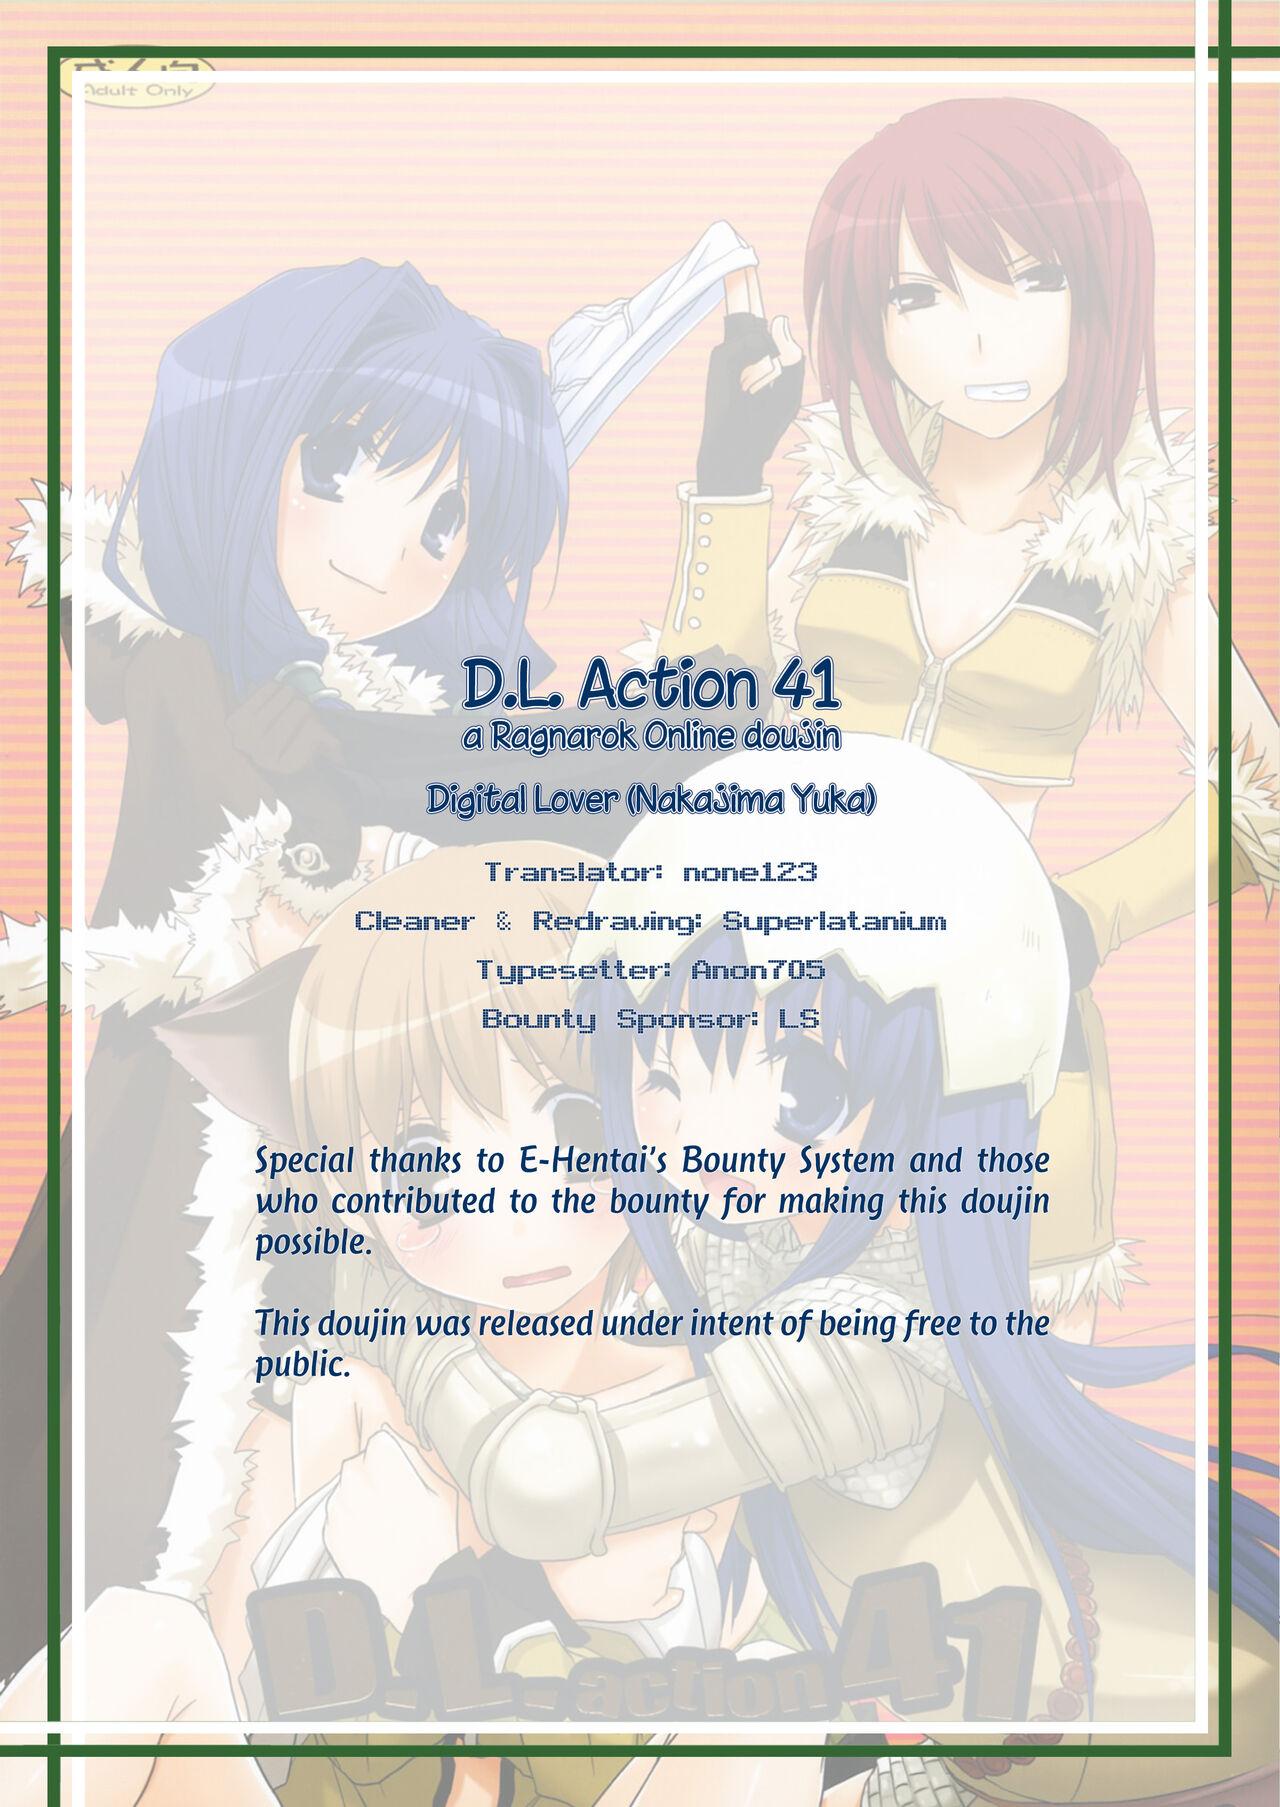 Topless D.L. Action 41 - Ragnarok online Animated - Picture 2